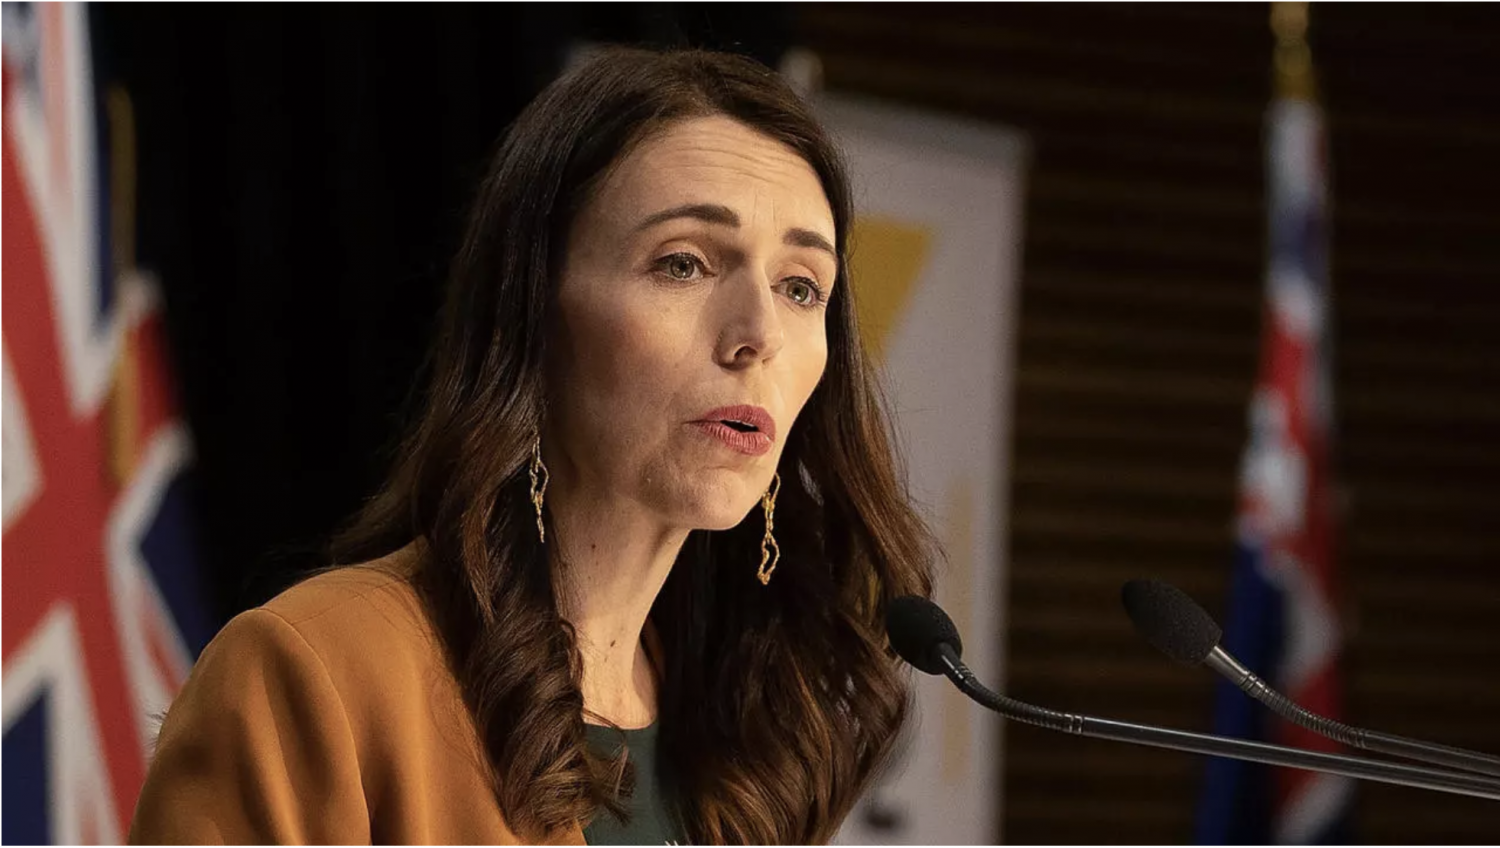 Prime Minister Jacinda Ardern urged New Zealanders to remain calm as the first community transmission of the coronavirus was reported in more than 100 days. Marty MELVILLE AFP/File